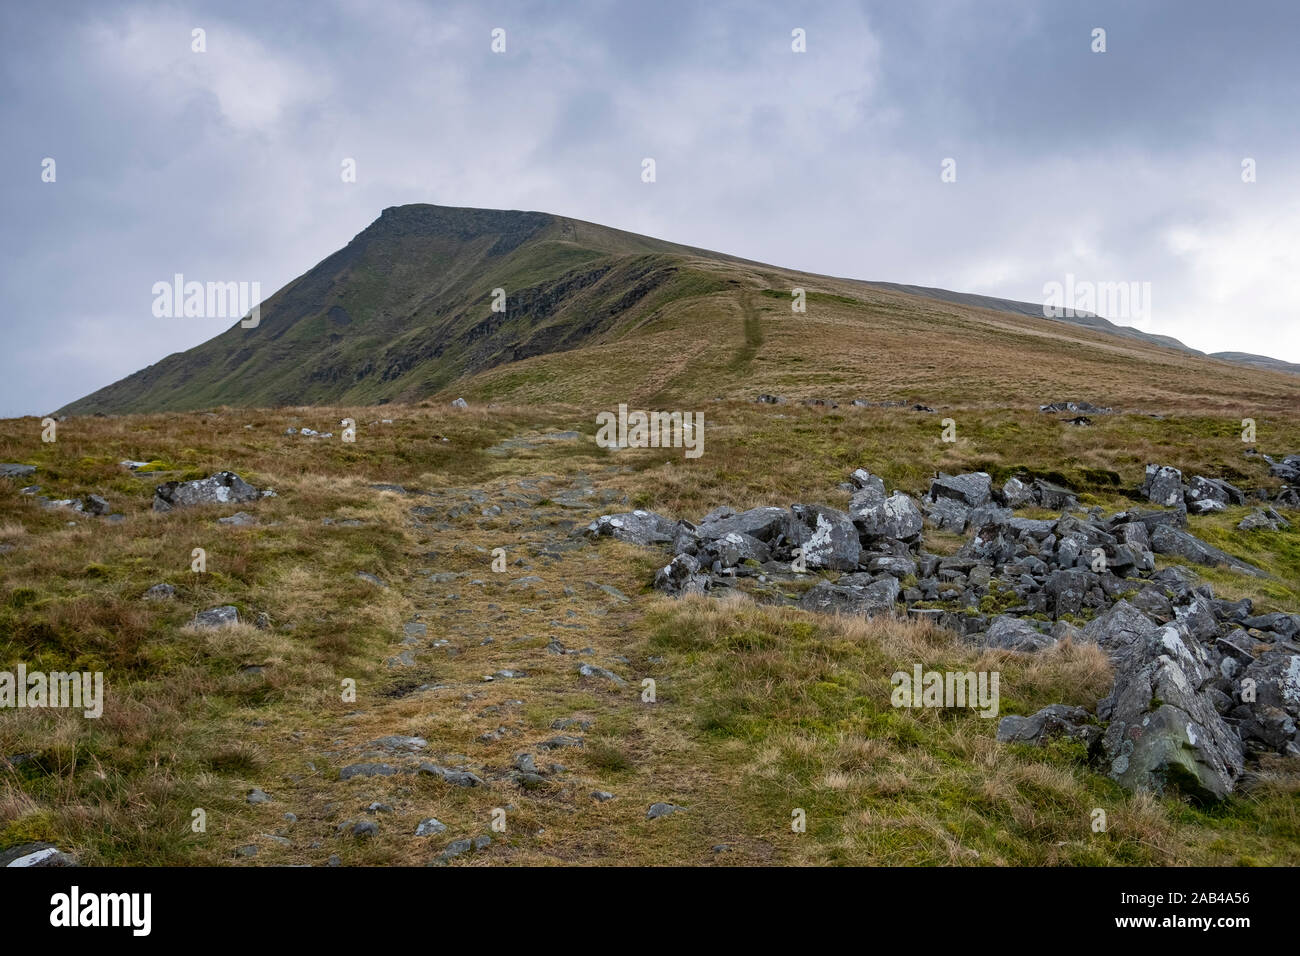 Wild Boar Fell, Mallerstang, in The Yorkshire Dales, England, UK Stock Photo